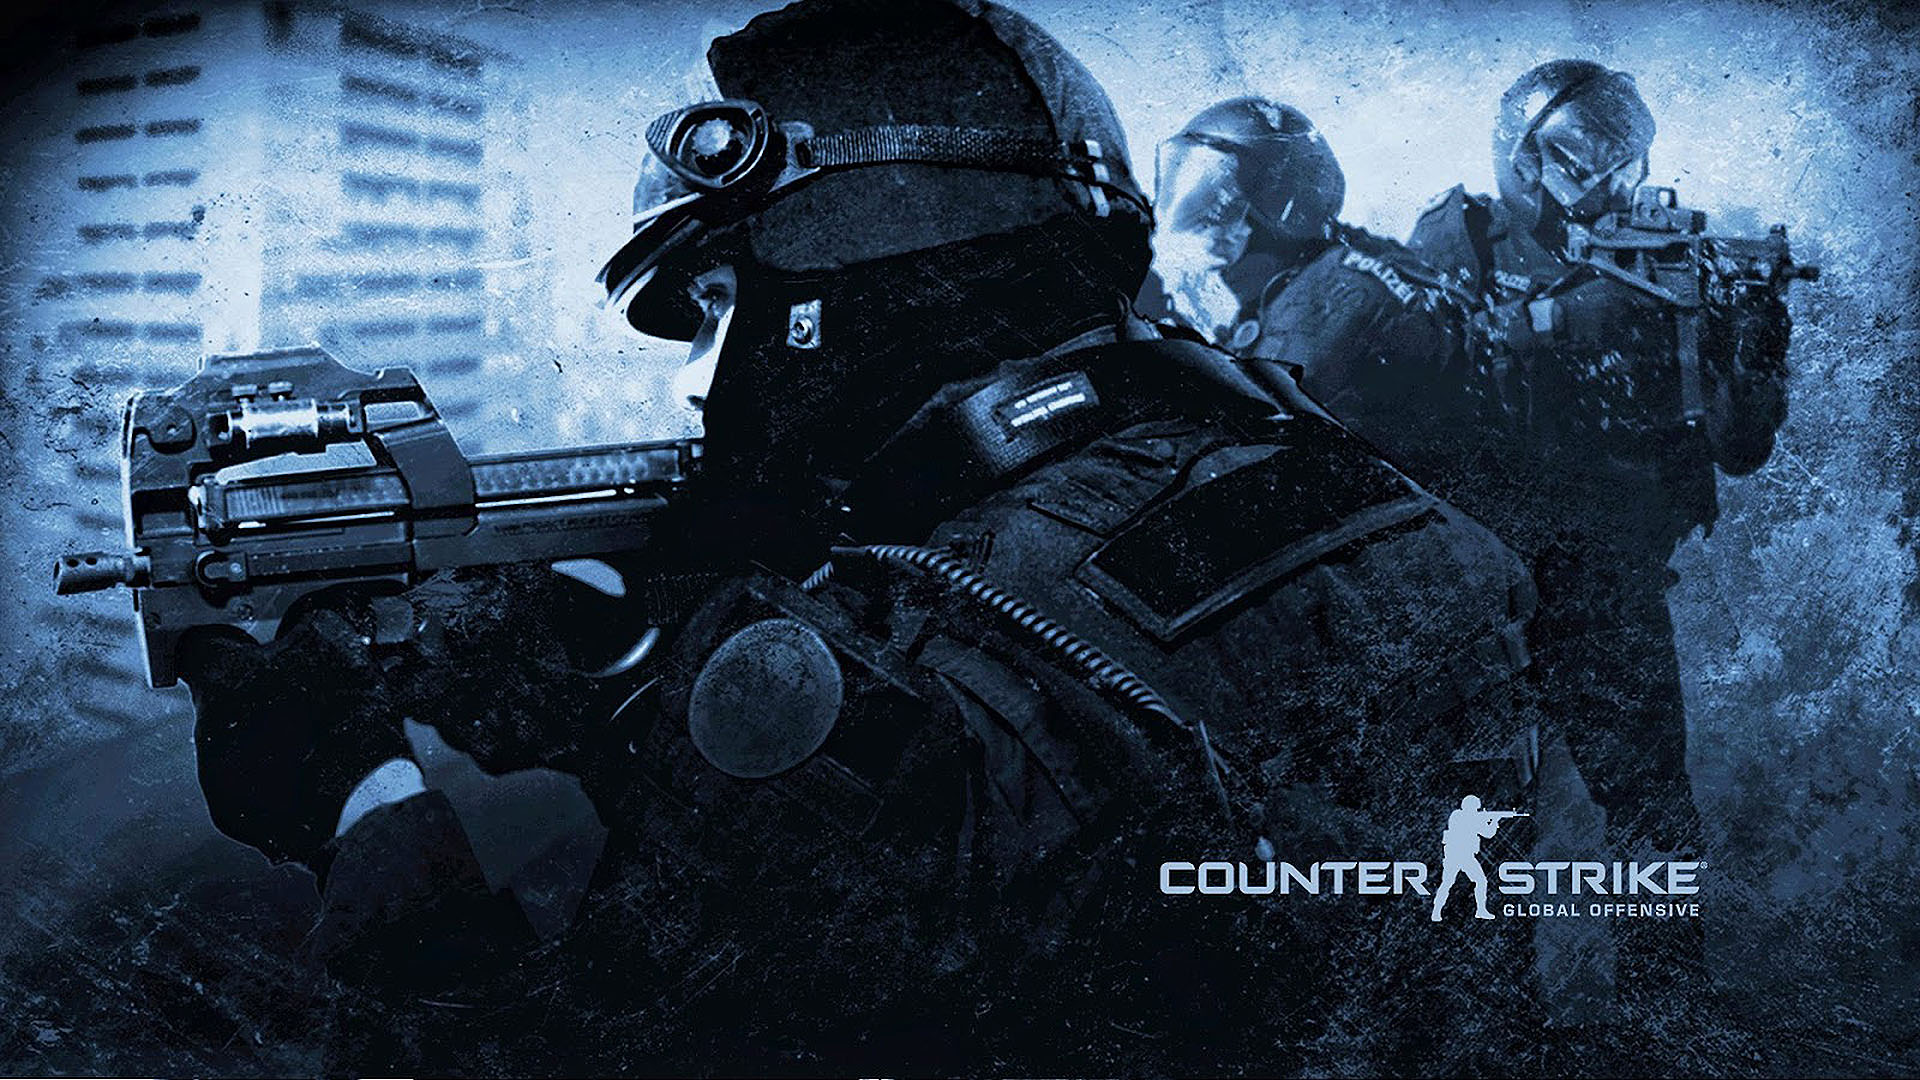 Download wallpaper 950x1534 counter-strike: global offensive, a